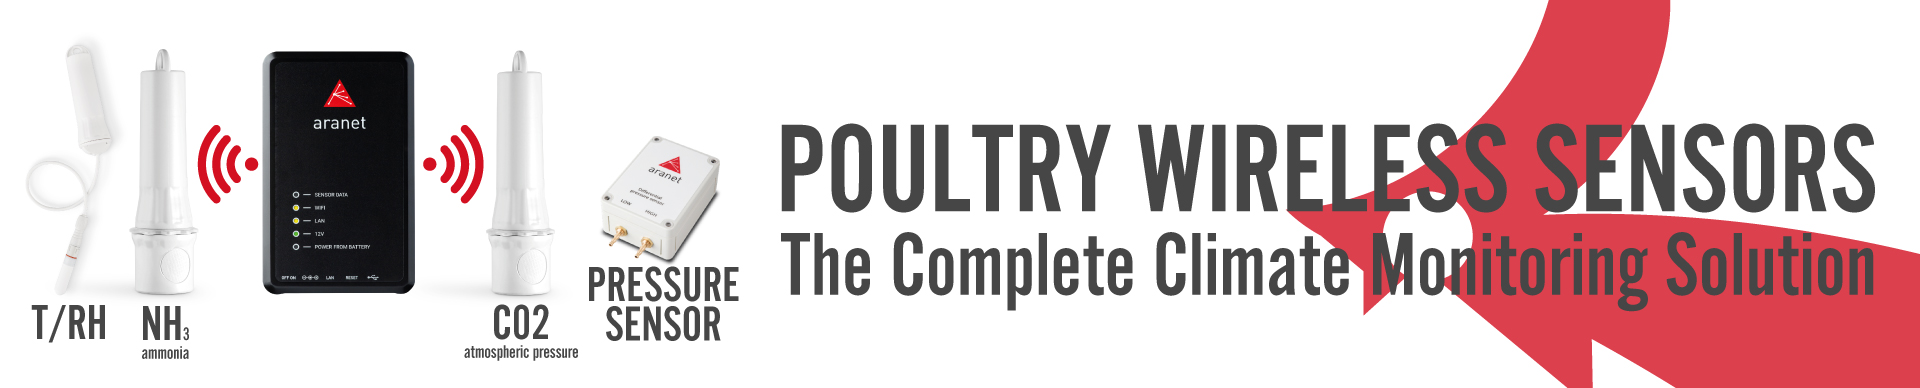 Poultry Wireless Sensors. The complete climate monitoring solution